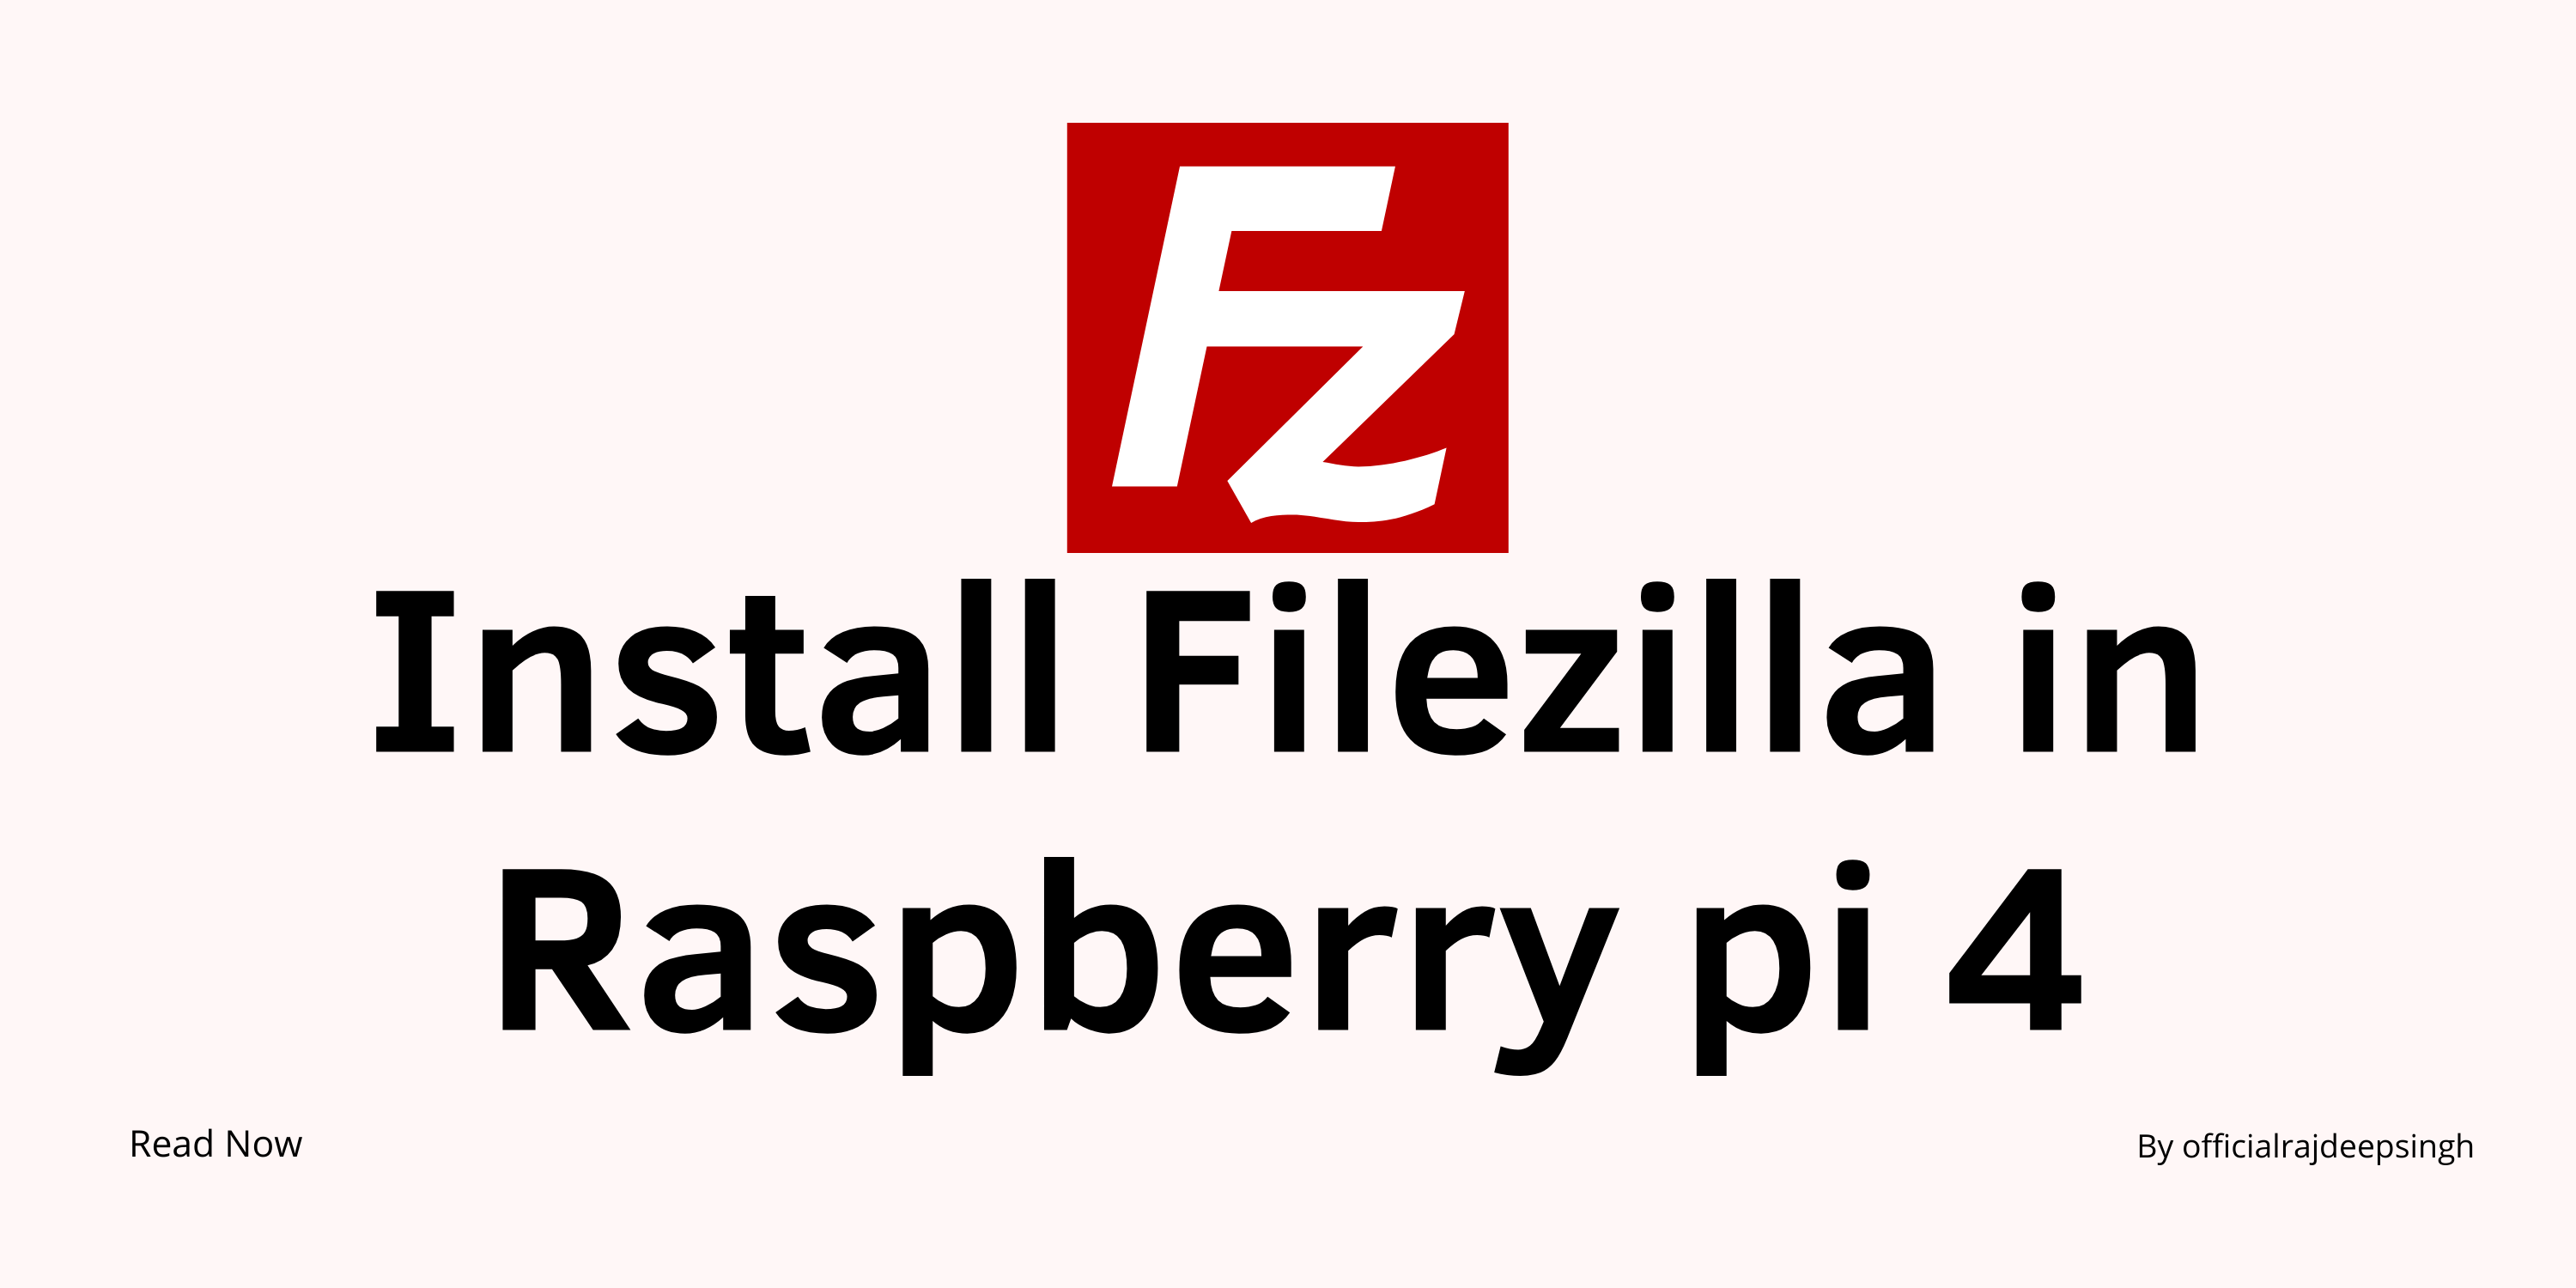 How to install Filezilla in Raspberry pi 4?